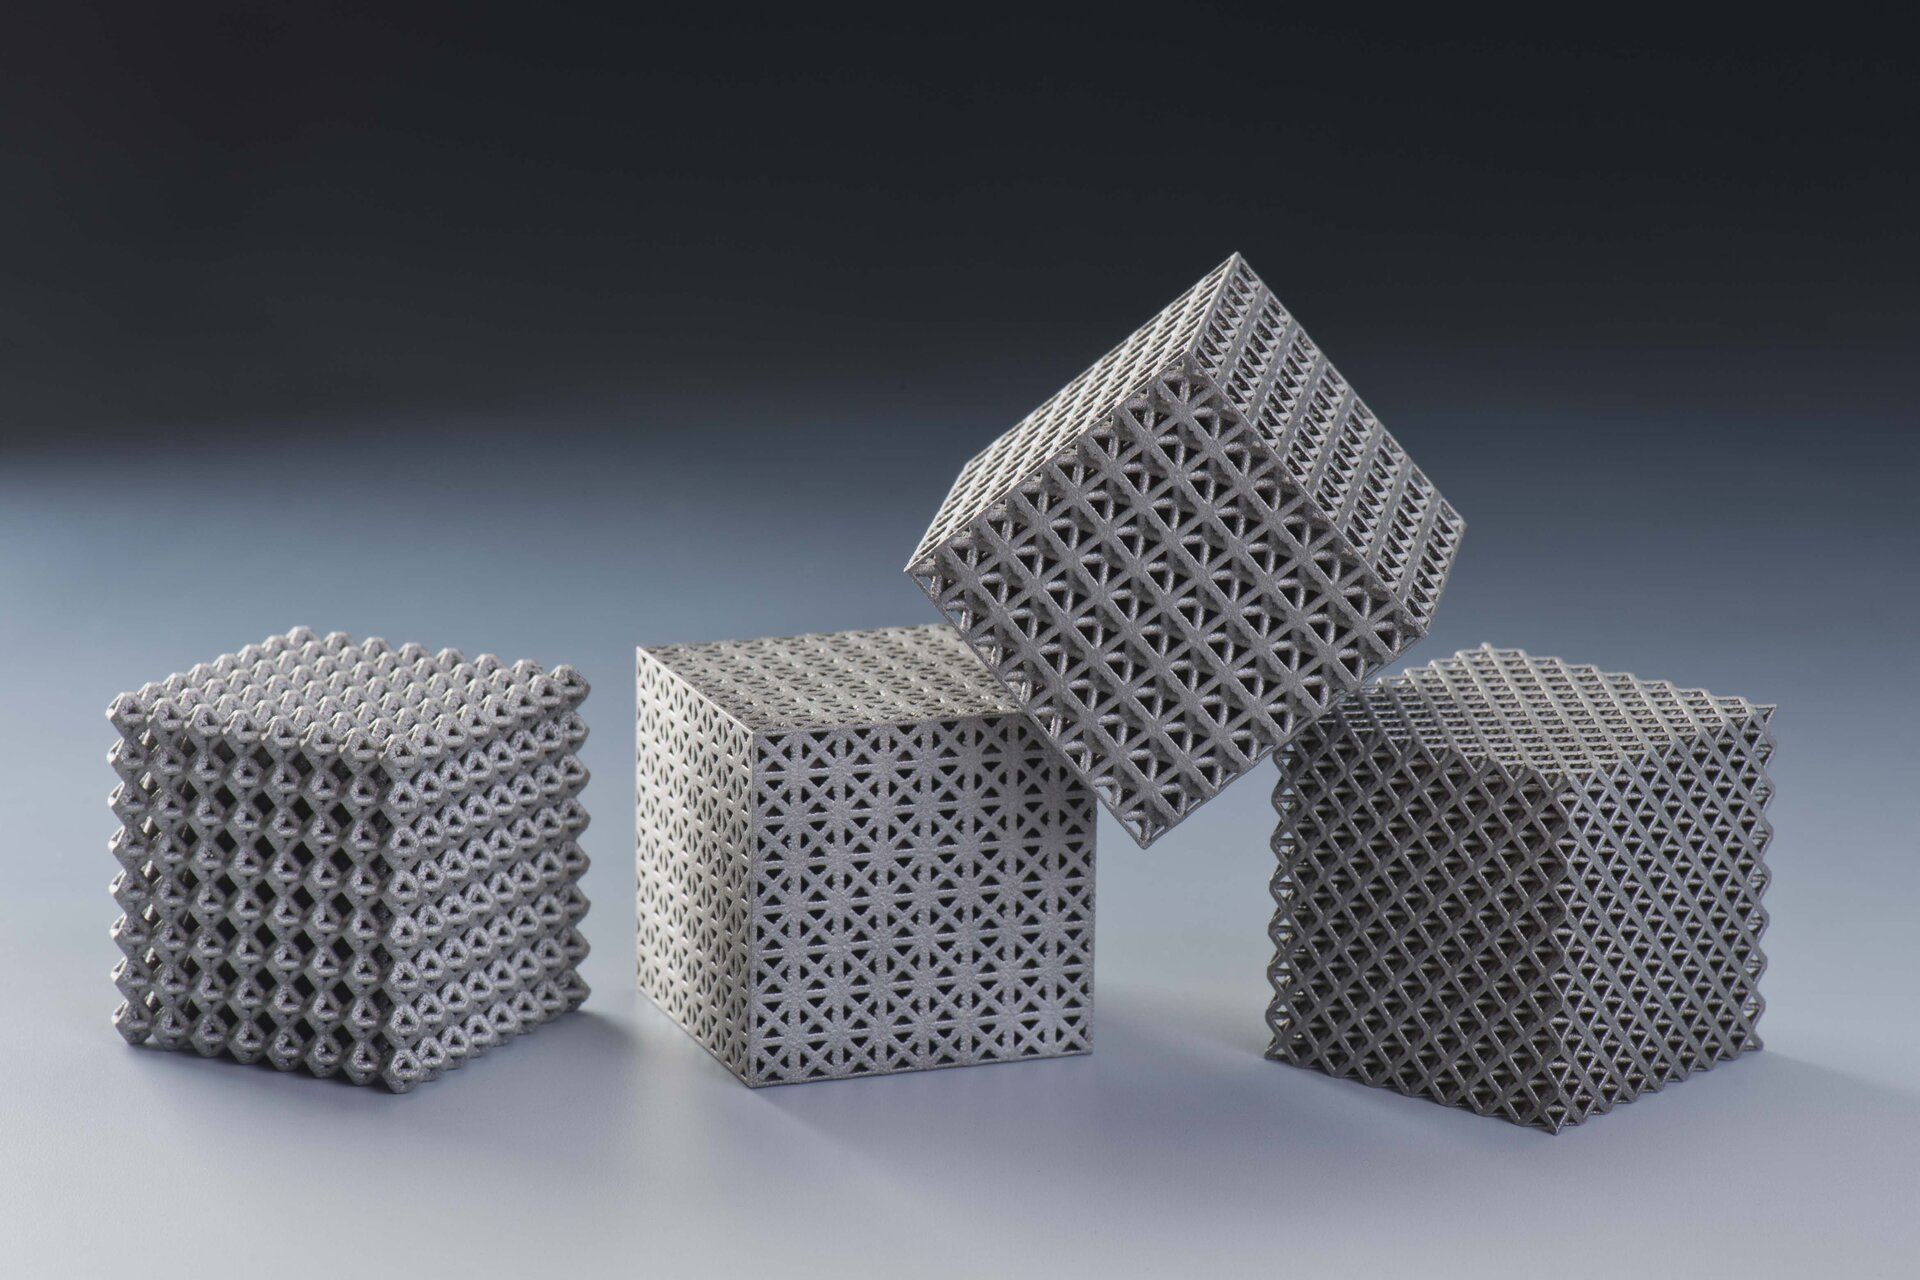 Examples of 3D-printed lattices